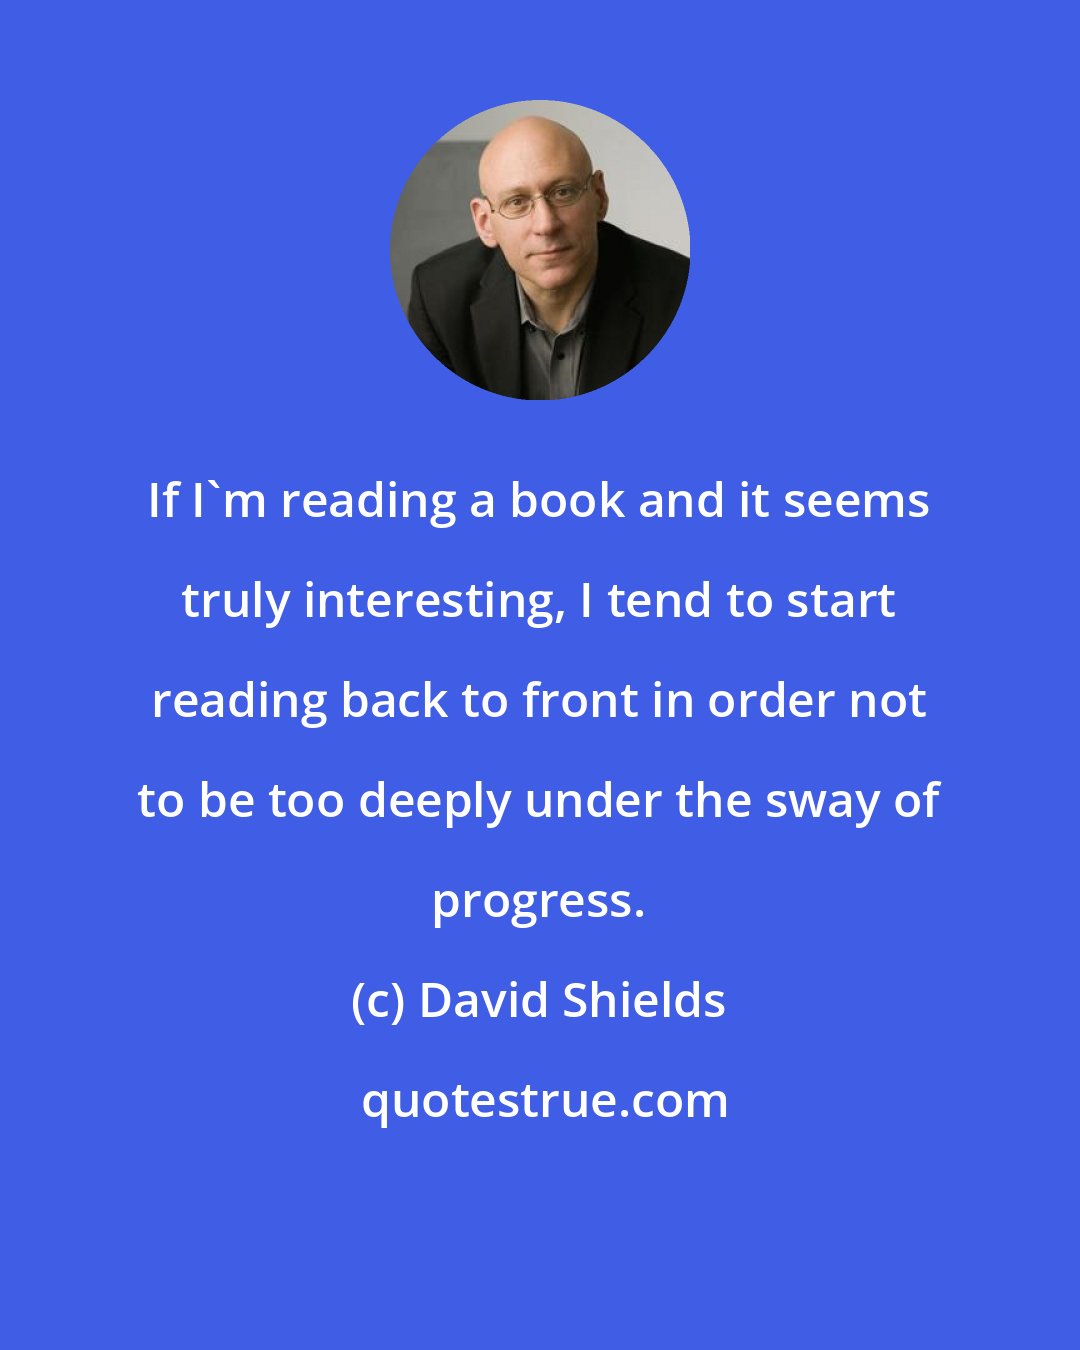 David Shields: If I'm reading a book and it seems truly interesting, I tend to start reading back to front in order not to be too deeply under the sway of progress.